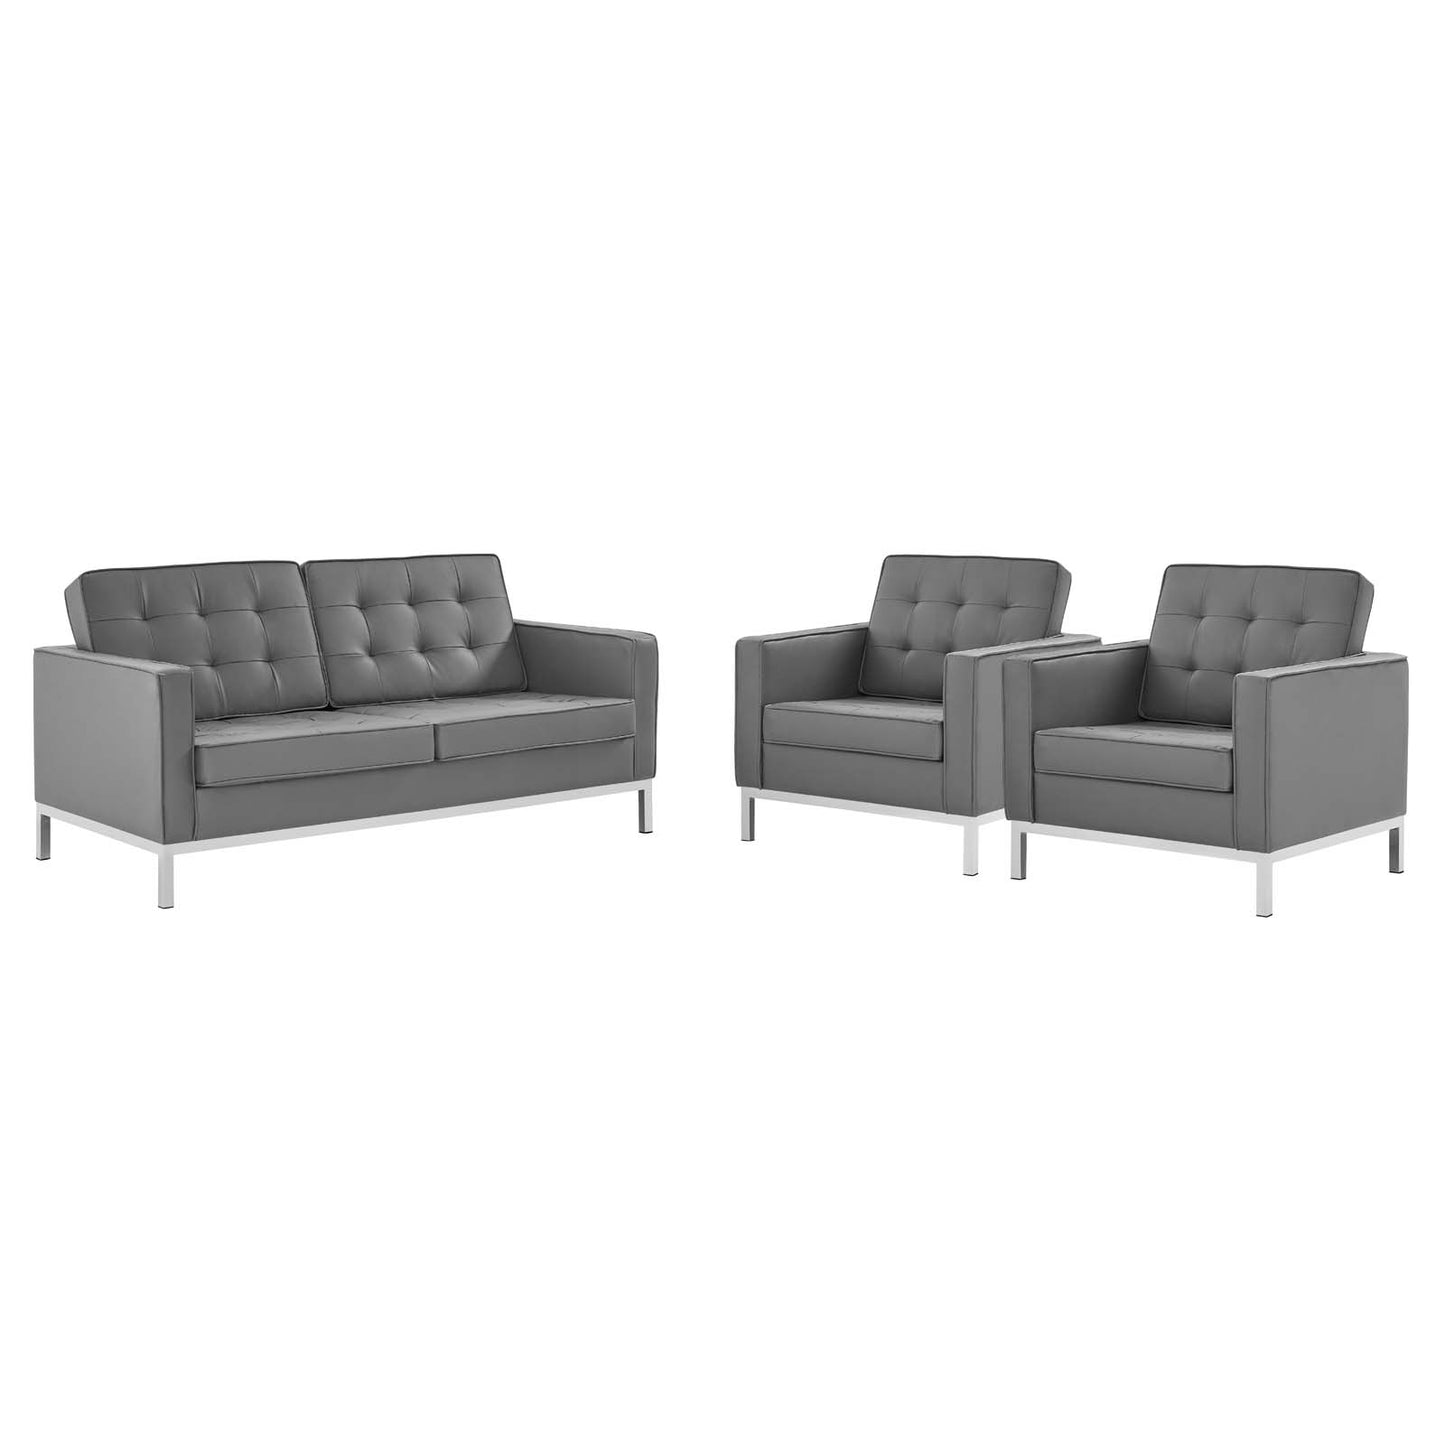 Loft 3 Piece Tufted Upholstered Faux Leather Set Silver Gray EEI-4103-SLV-GRY-SET